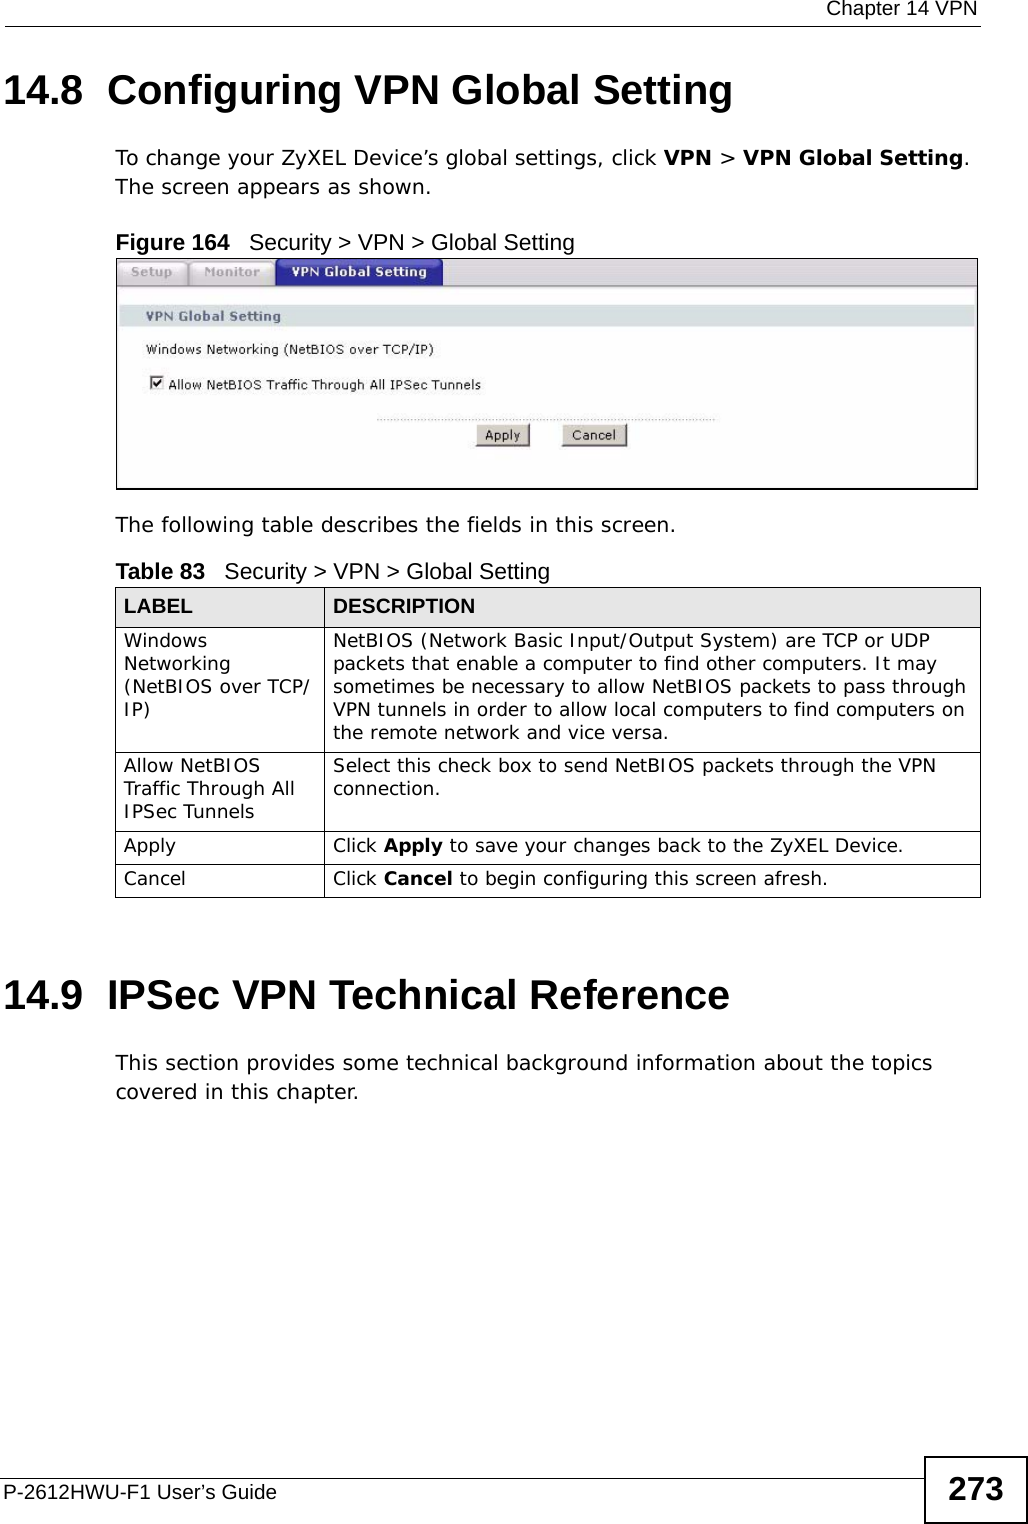  Chapter 14 VPNP-2612HWU-F1 User’s Guide 27314.8  Configuring VPN Global Setting To change your ZyXEL Device’s global settings, click VPN &gt; VPN Global Setting. The screen appears as shown.Figure 164   Security &gt; VPN &gt; Global SettingThe following table describes the fields in this screen. 14.9  IPSec VPN Technical ReferenceThis section provides some technical background information about the topics covered in this chapter.Table 83   Security &gt; VPN &gt; Global SettingLABEL DESCRIPTIONWindows Networking (NetBIOS over TCP/IP)NetBIOS (Network Basic Input/Output System) are TCP or UDP packets that enable a computer to find other computers. It may sometimes be necessary to allow NetBIOS packets to pass through VPN tunnels in order to allow local computers to find computers on the remote network and vice versa.Allow NetBIOS Traffic Through All IPSec TunnelsSelect this check box to send NetBIOS packets through the VPN connection.Apply Click Apply to save your changes back to the ZyXEL Device.Cancel Click Cancel to begin configuring this screen afresh.